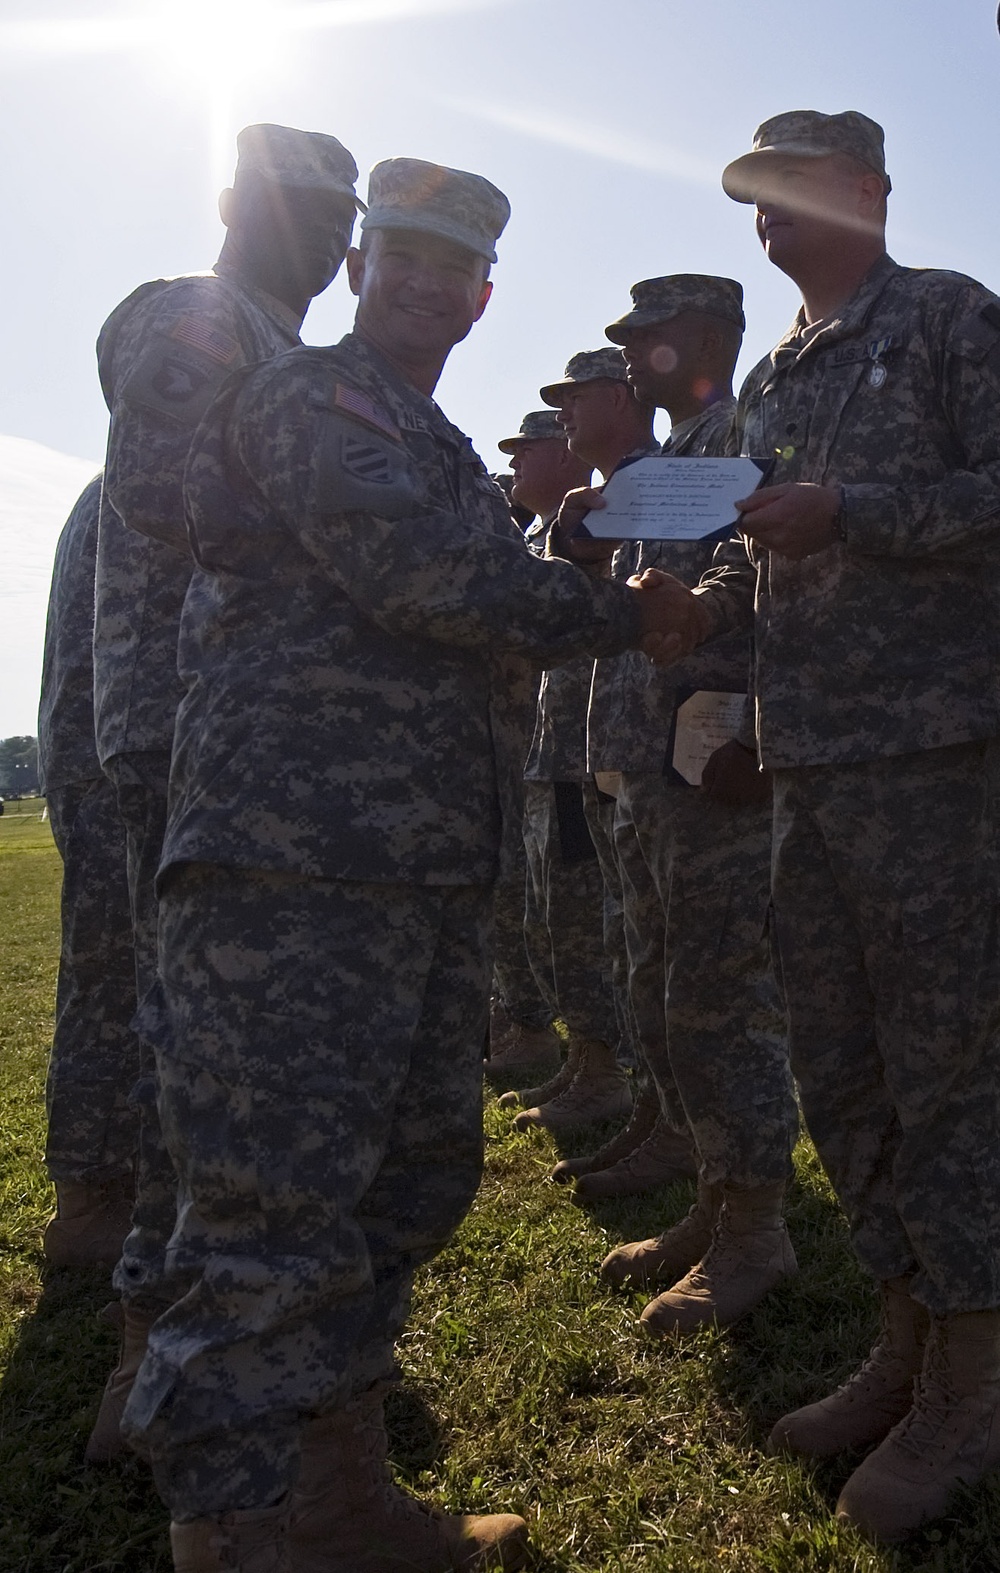 Soldiers provide first aid and assistance to civilians off duty
Camp Atterbury troops recognized by leadership, Police, Fire chief